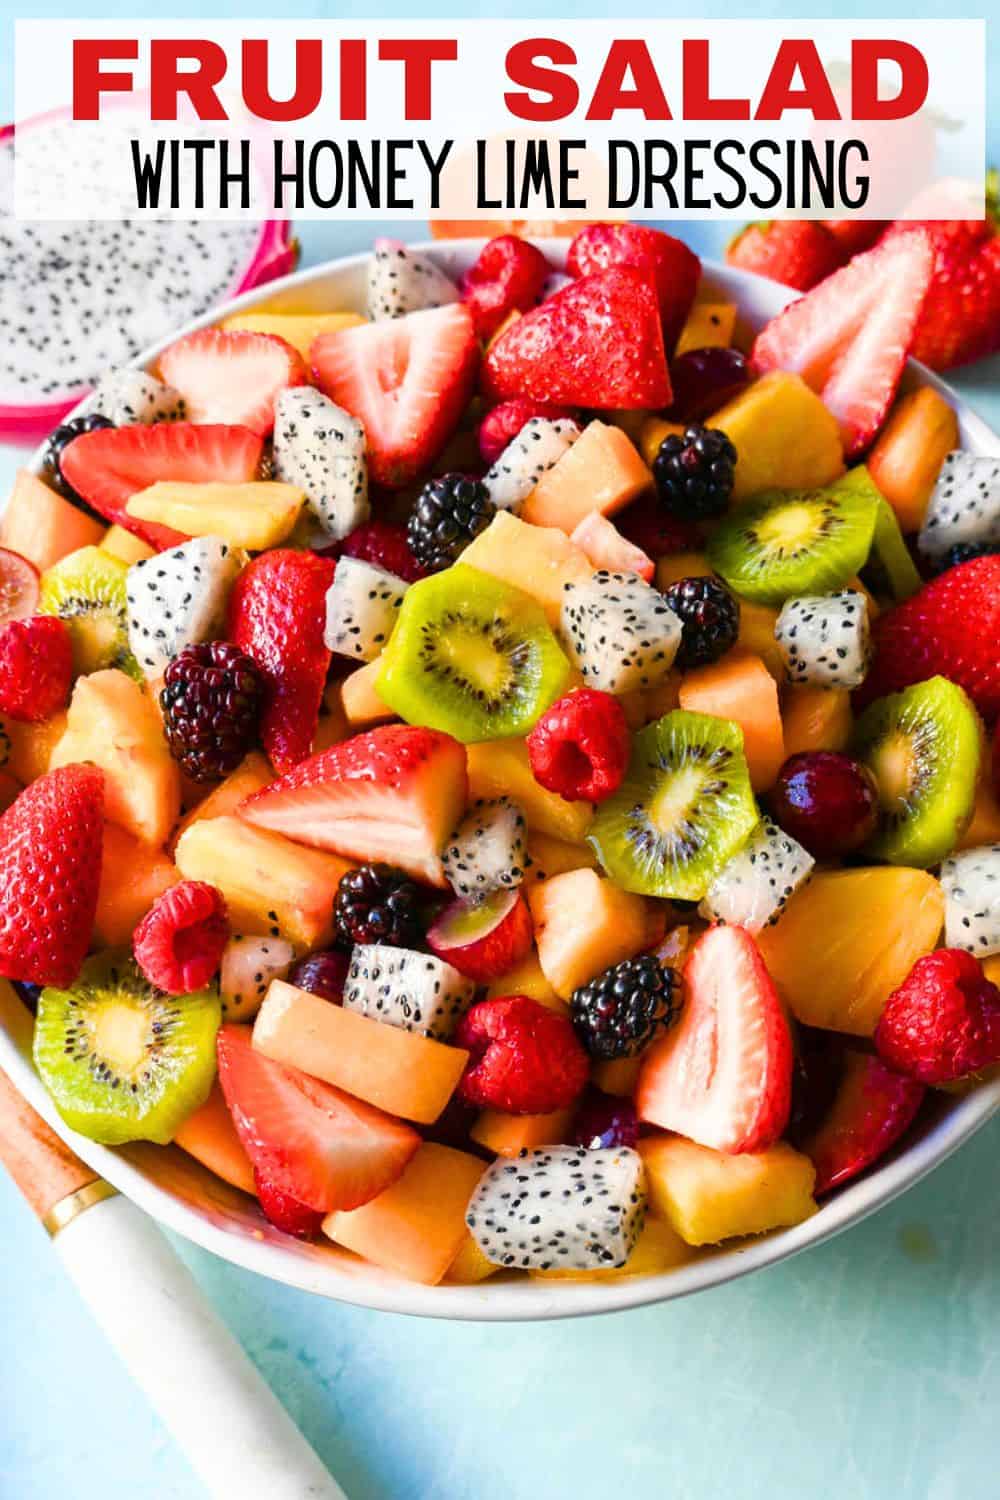 A bright and fresh fruit salad that is perfect for summertime! Made with vibrant and flavorful seasonal fruits and a sweet and simple honey lime dressing. The perfect fruit salad recipe!